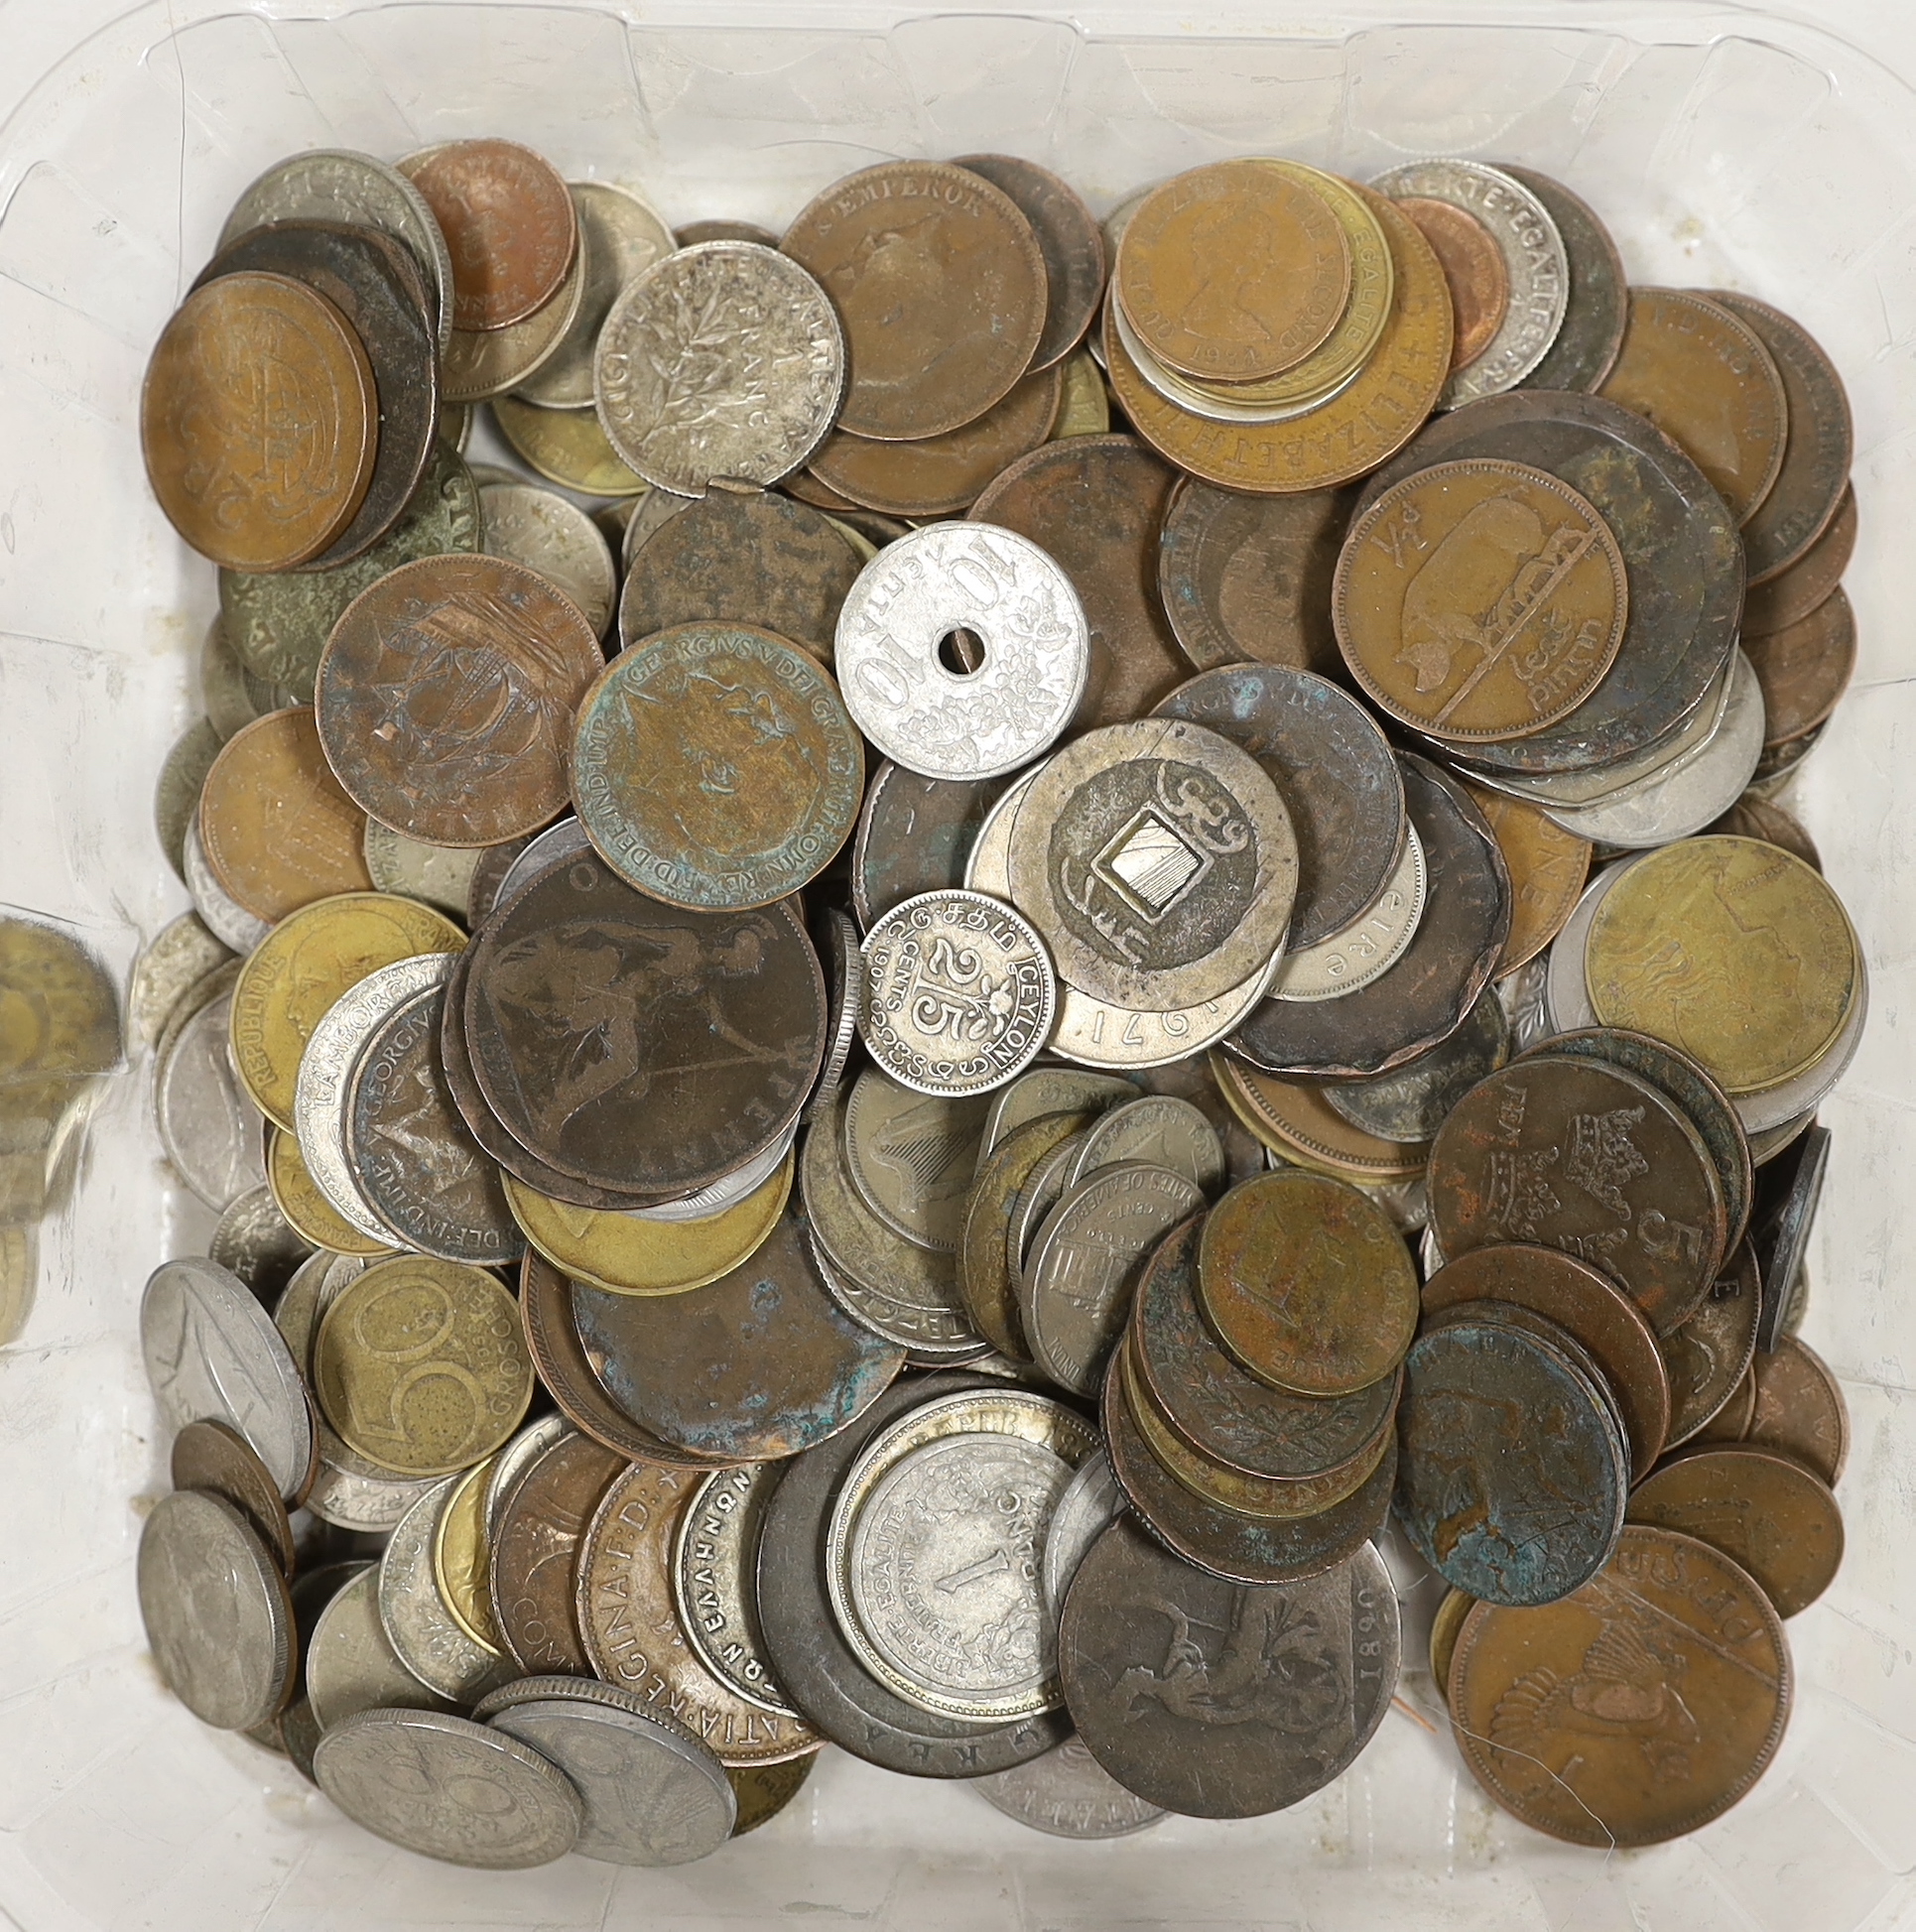 World coins to include Republic of South Africa 2 1/2 shillings 1897, two shillings 1897, one Penny 1898, India princely states one rupee, East India Company half Anna 1835, US liberty head five cents, 1909, etc.